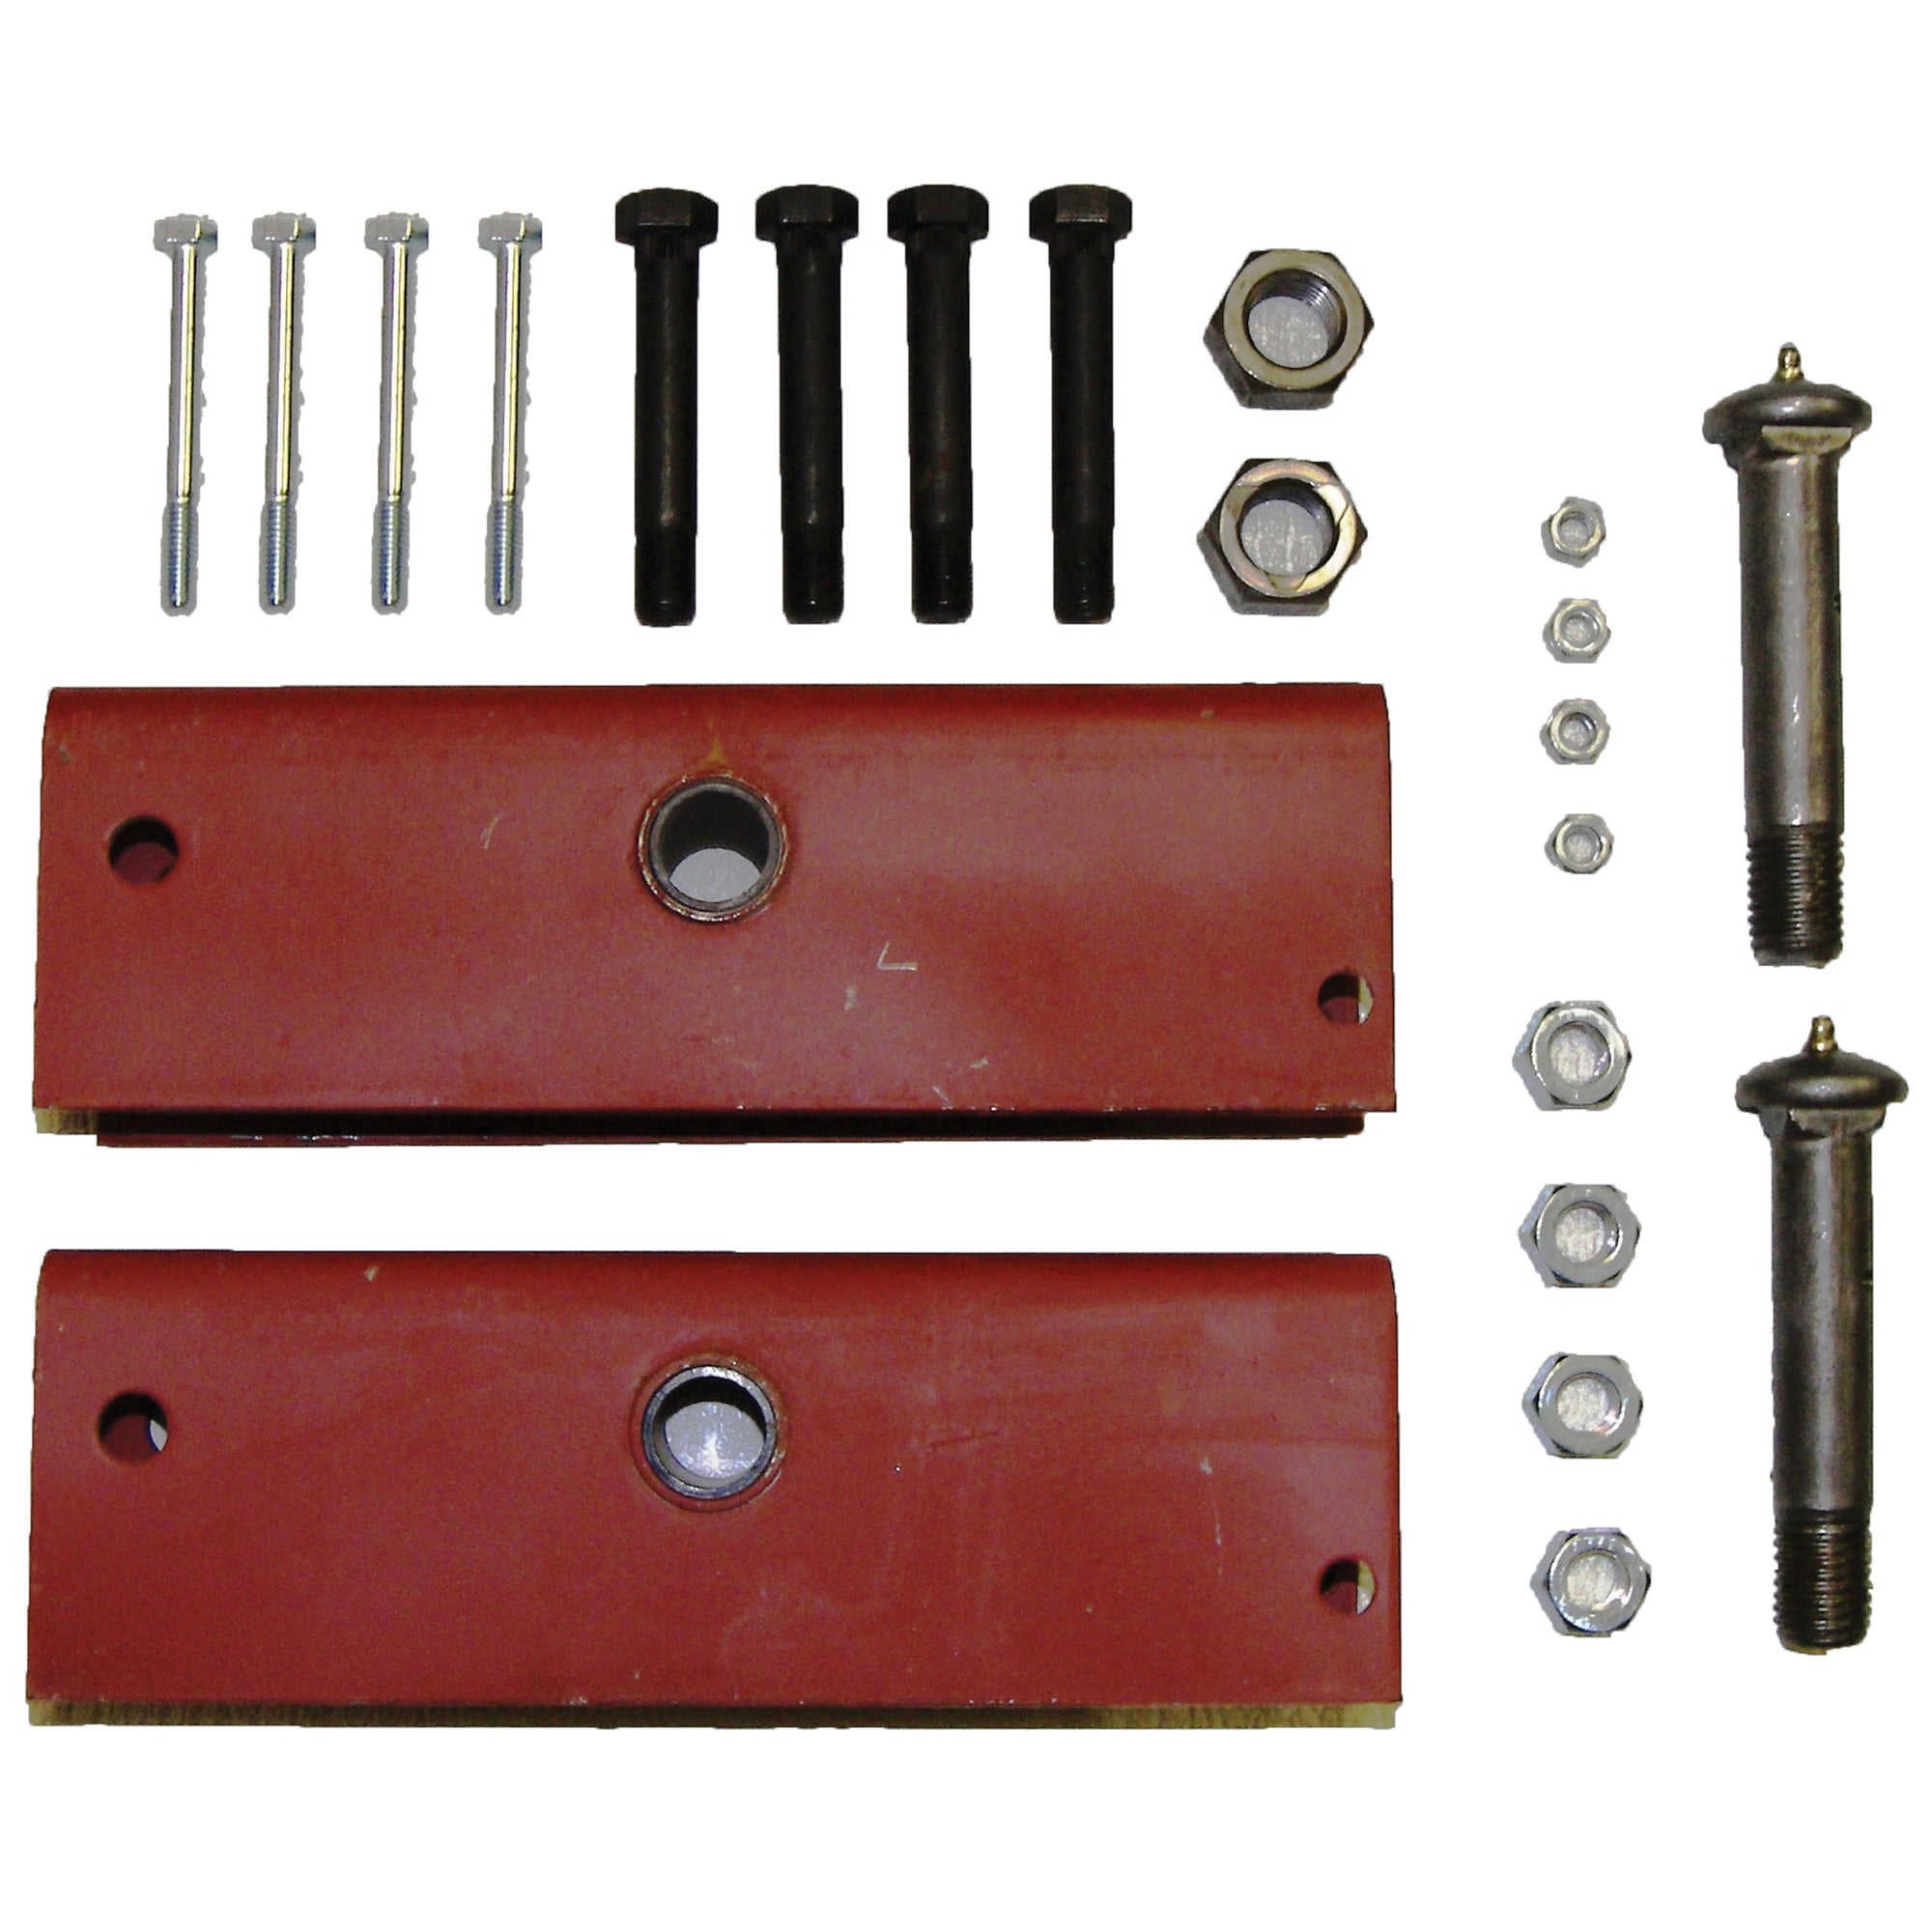 AP Products 014-128877 Suspension Kit - Tandem Slipper NP Kit for 33.5 in. Axle Spacing w/ EQ 13-4